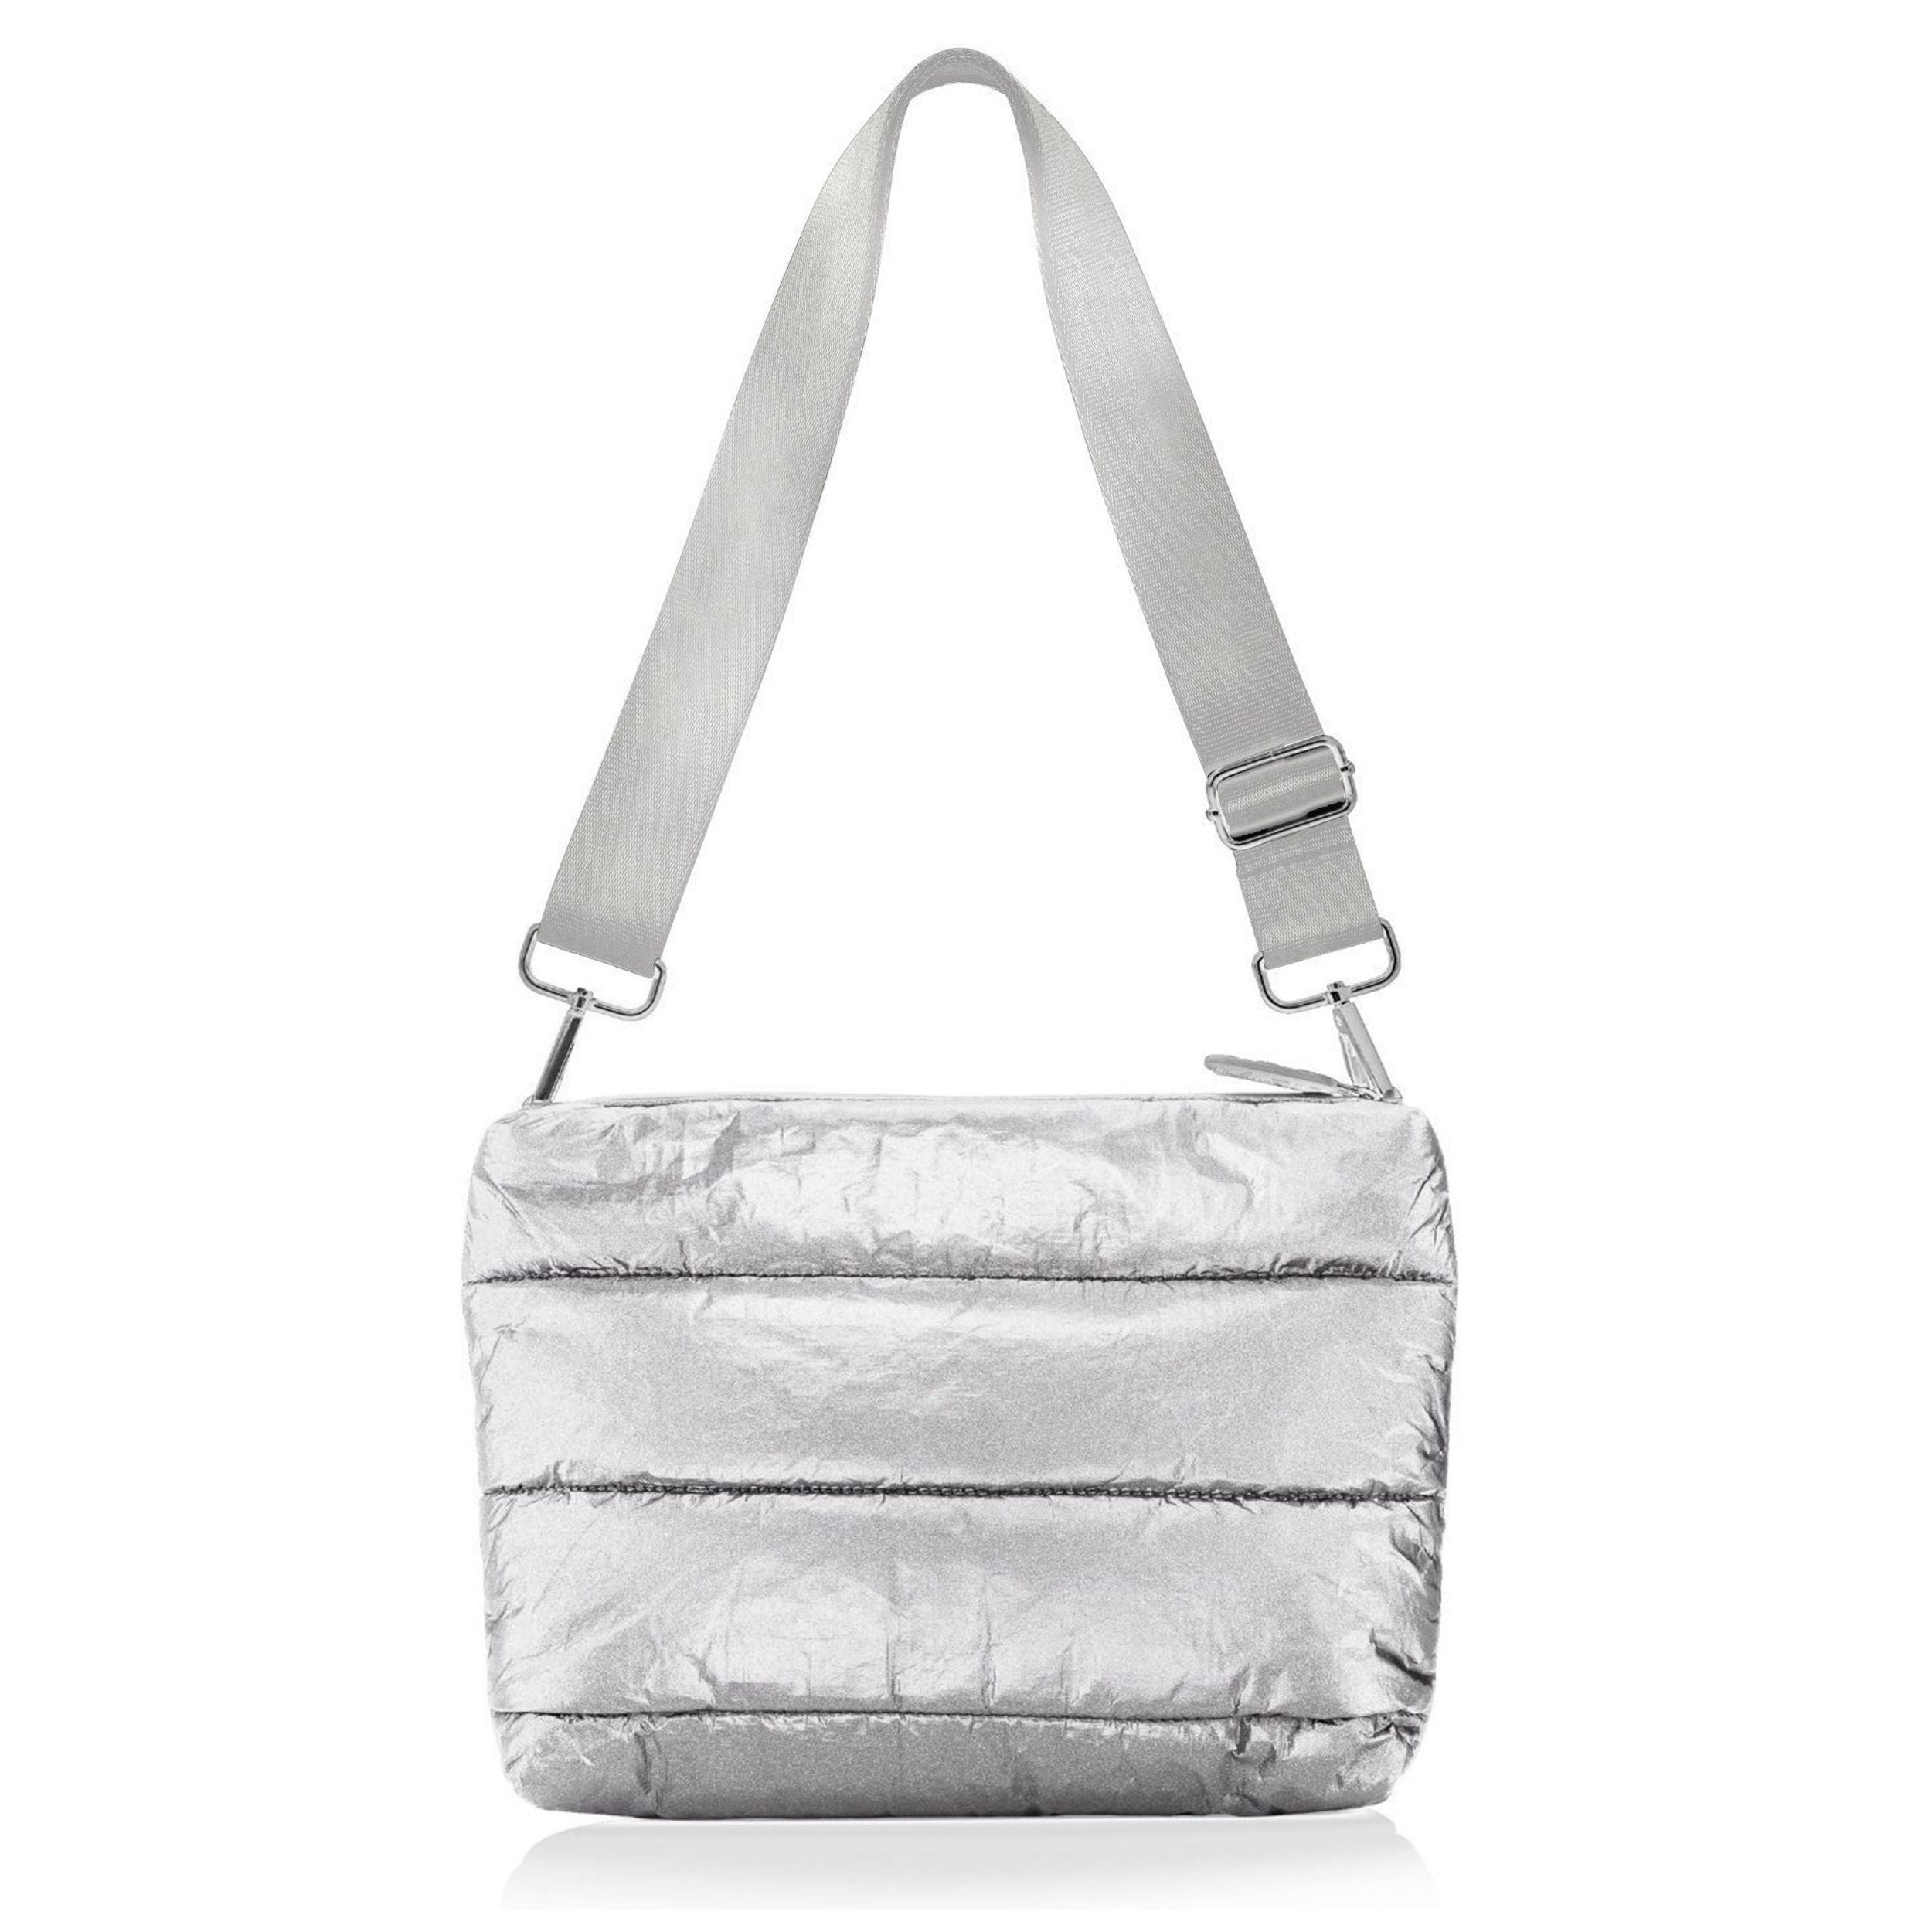 Silver Puffer Purse or Handbag - Designed for On the Go Adventures